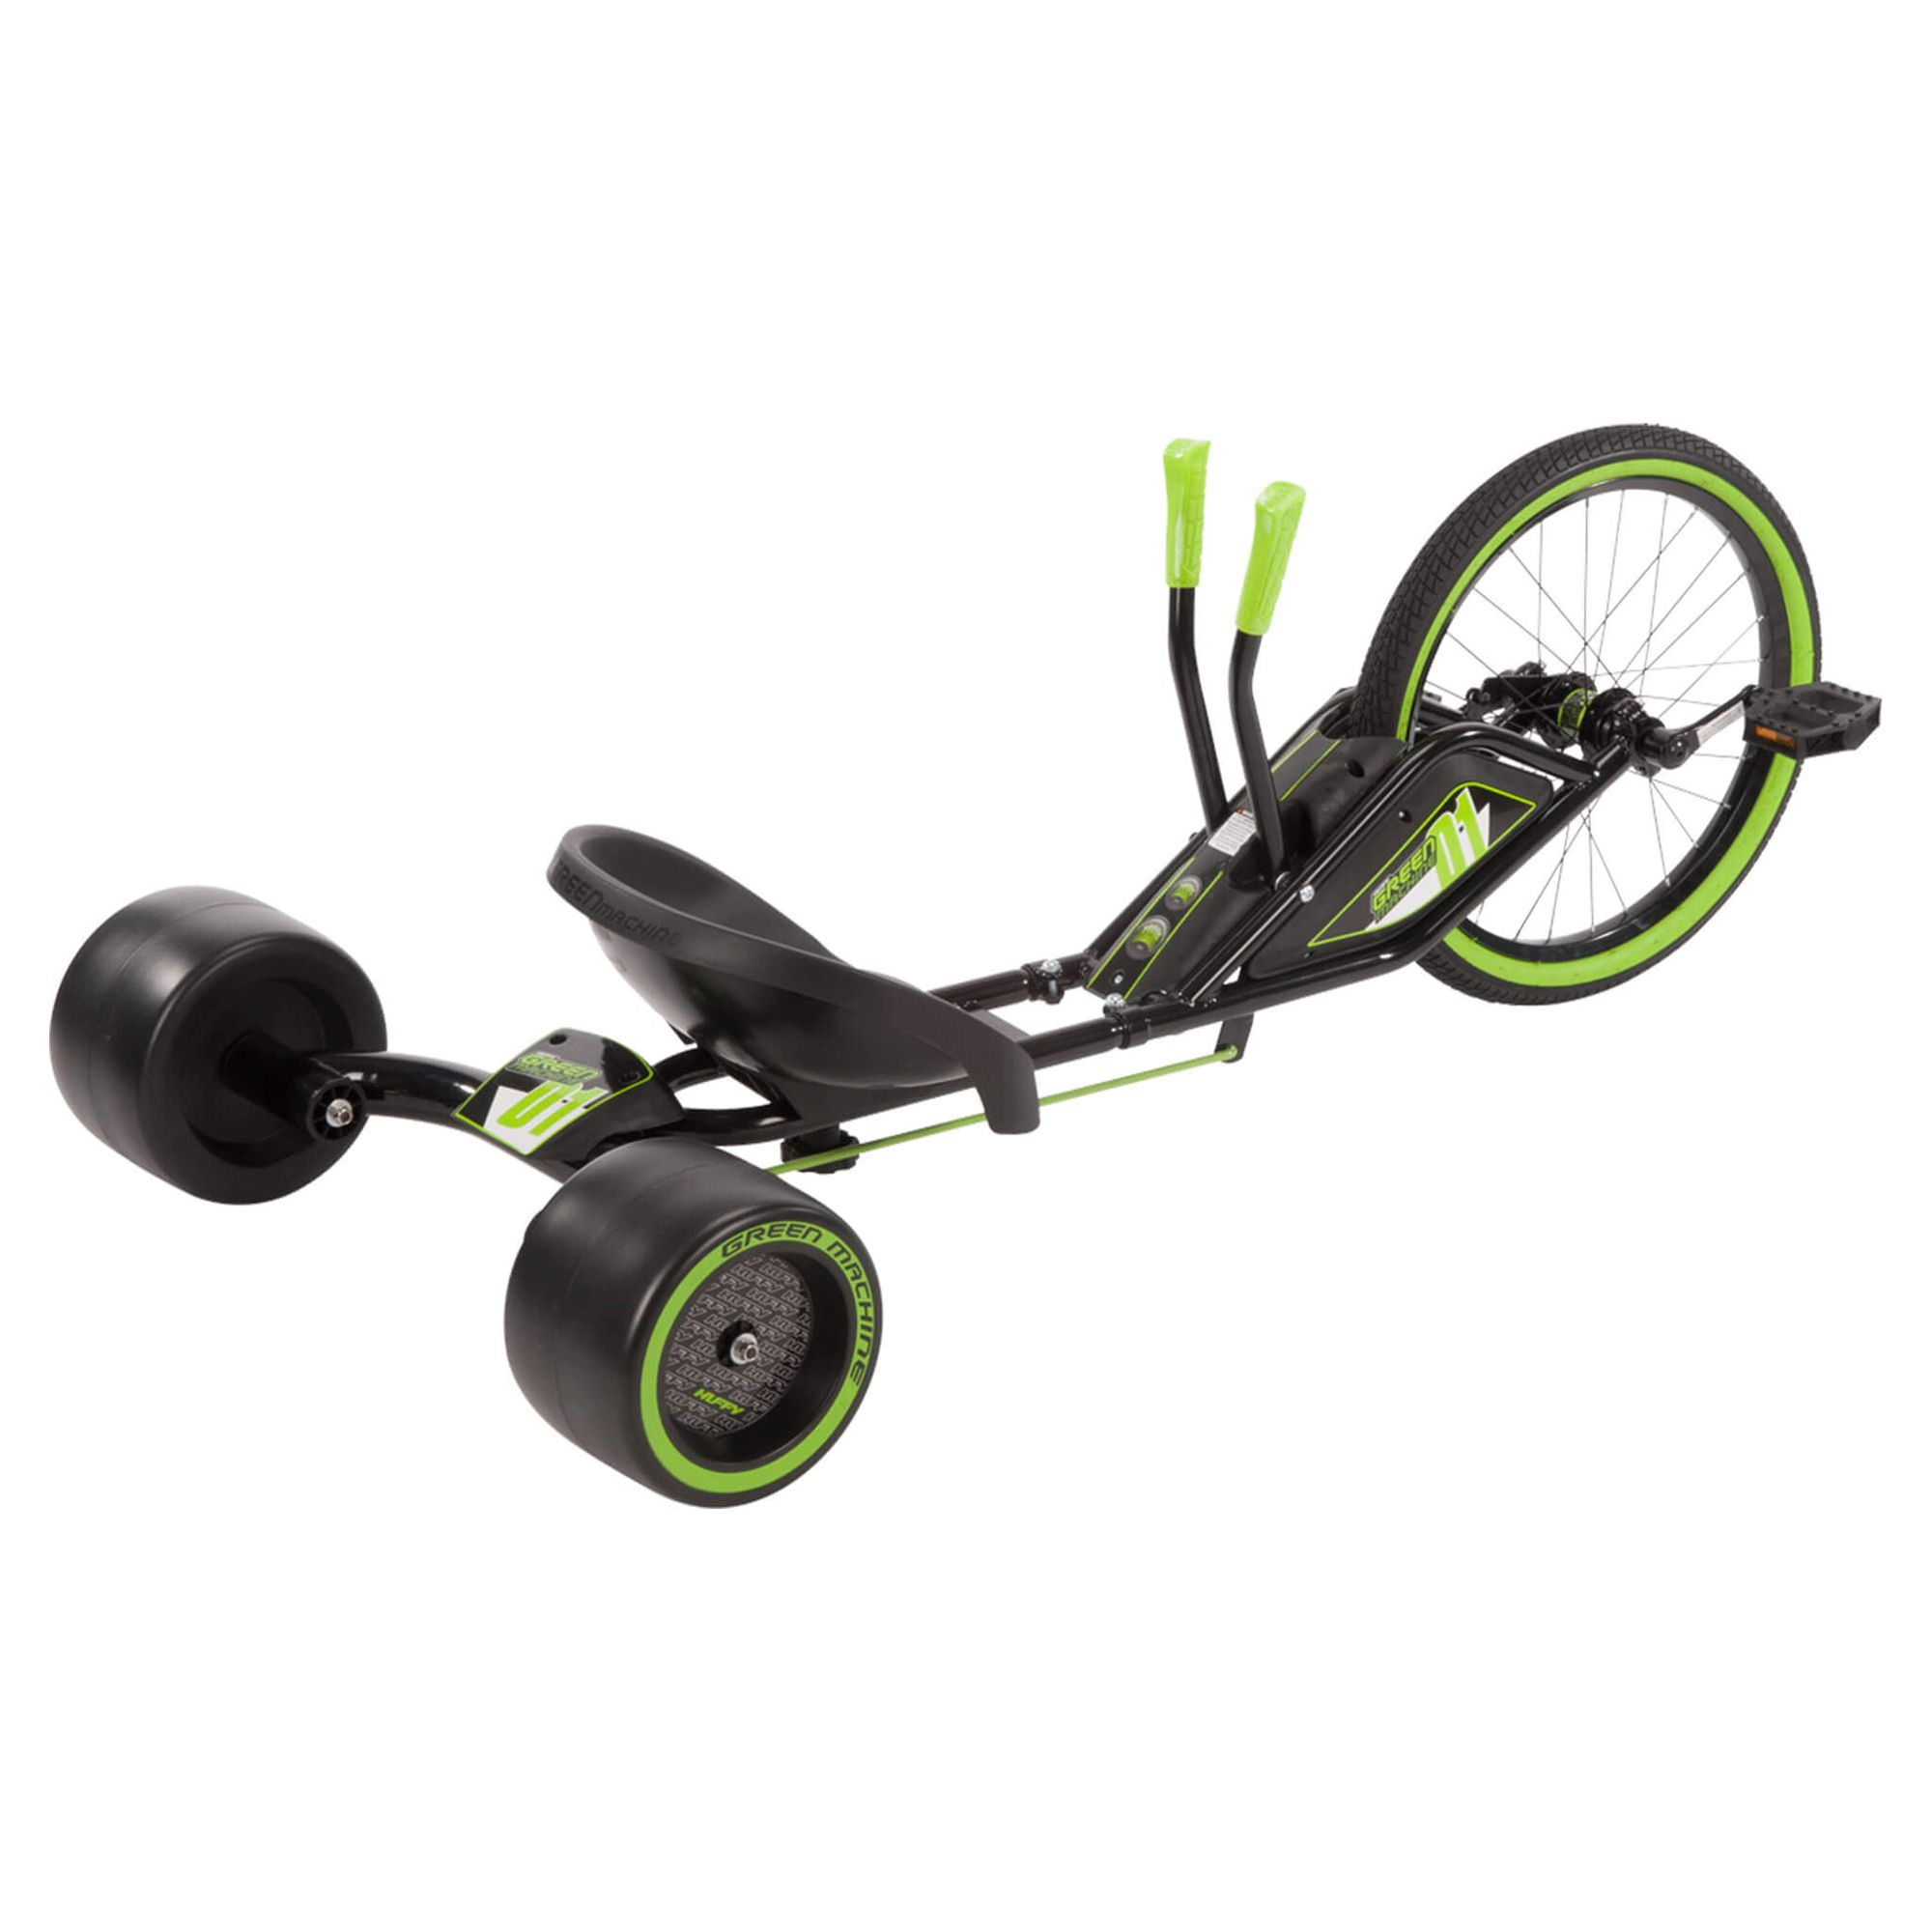 Huffy Green Machine RT 20-Inch 3-Wheel Tricycle in Green and Black - image 4 of 4